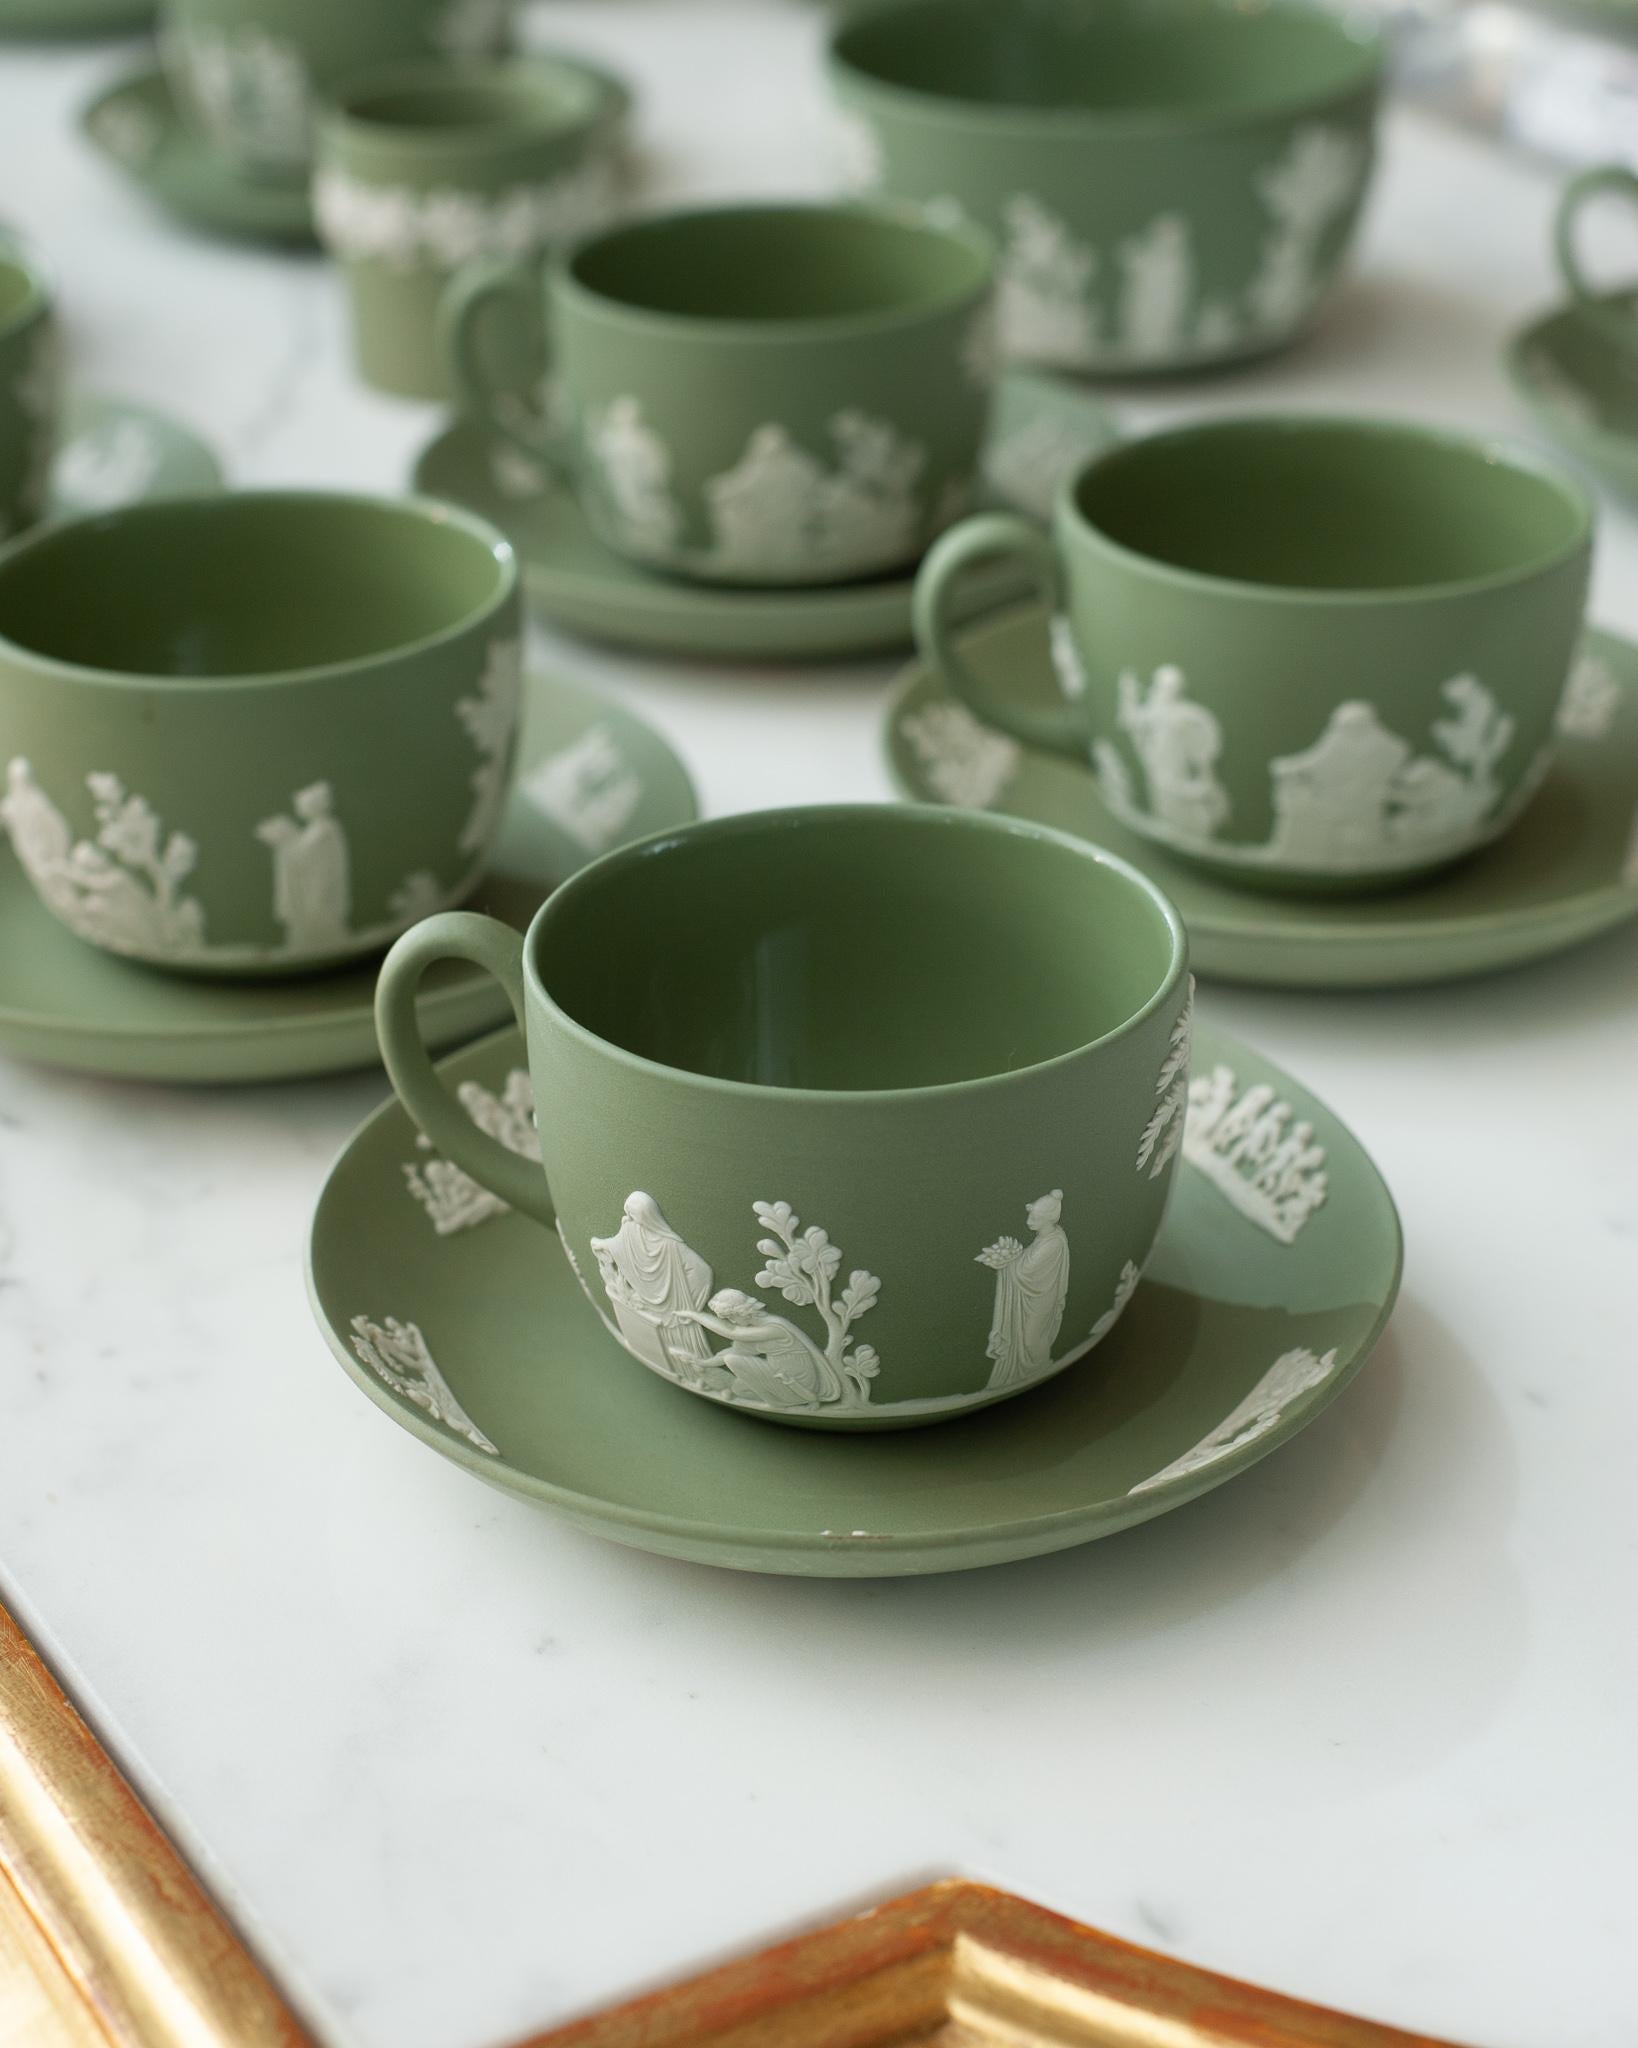 A stunning antique set of 12 Wedgwood Sage Green Jasperware teacups and saucers with white overlay.